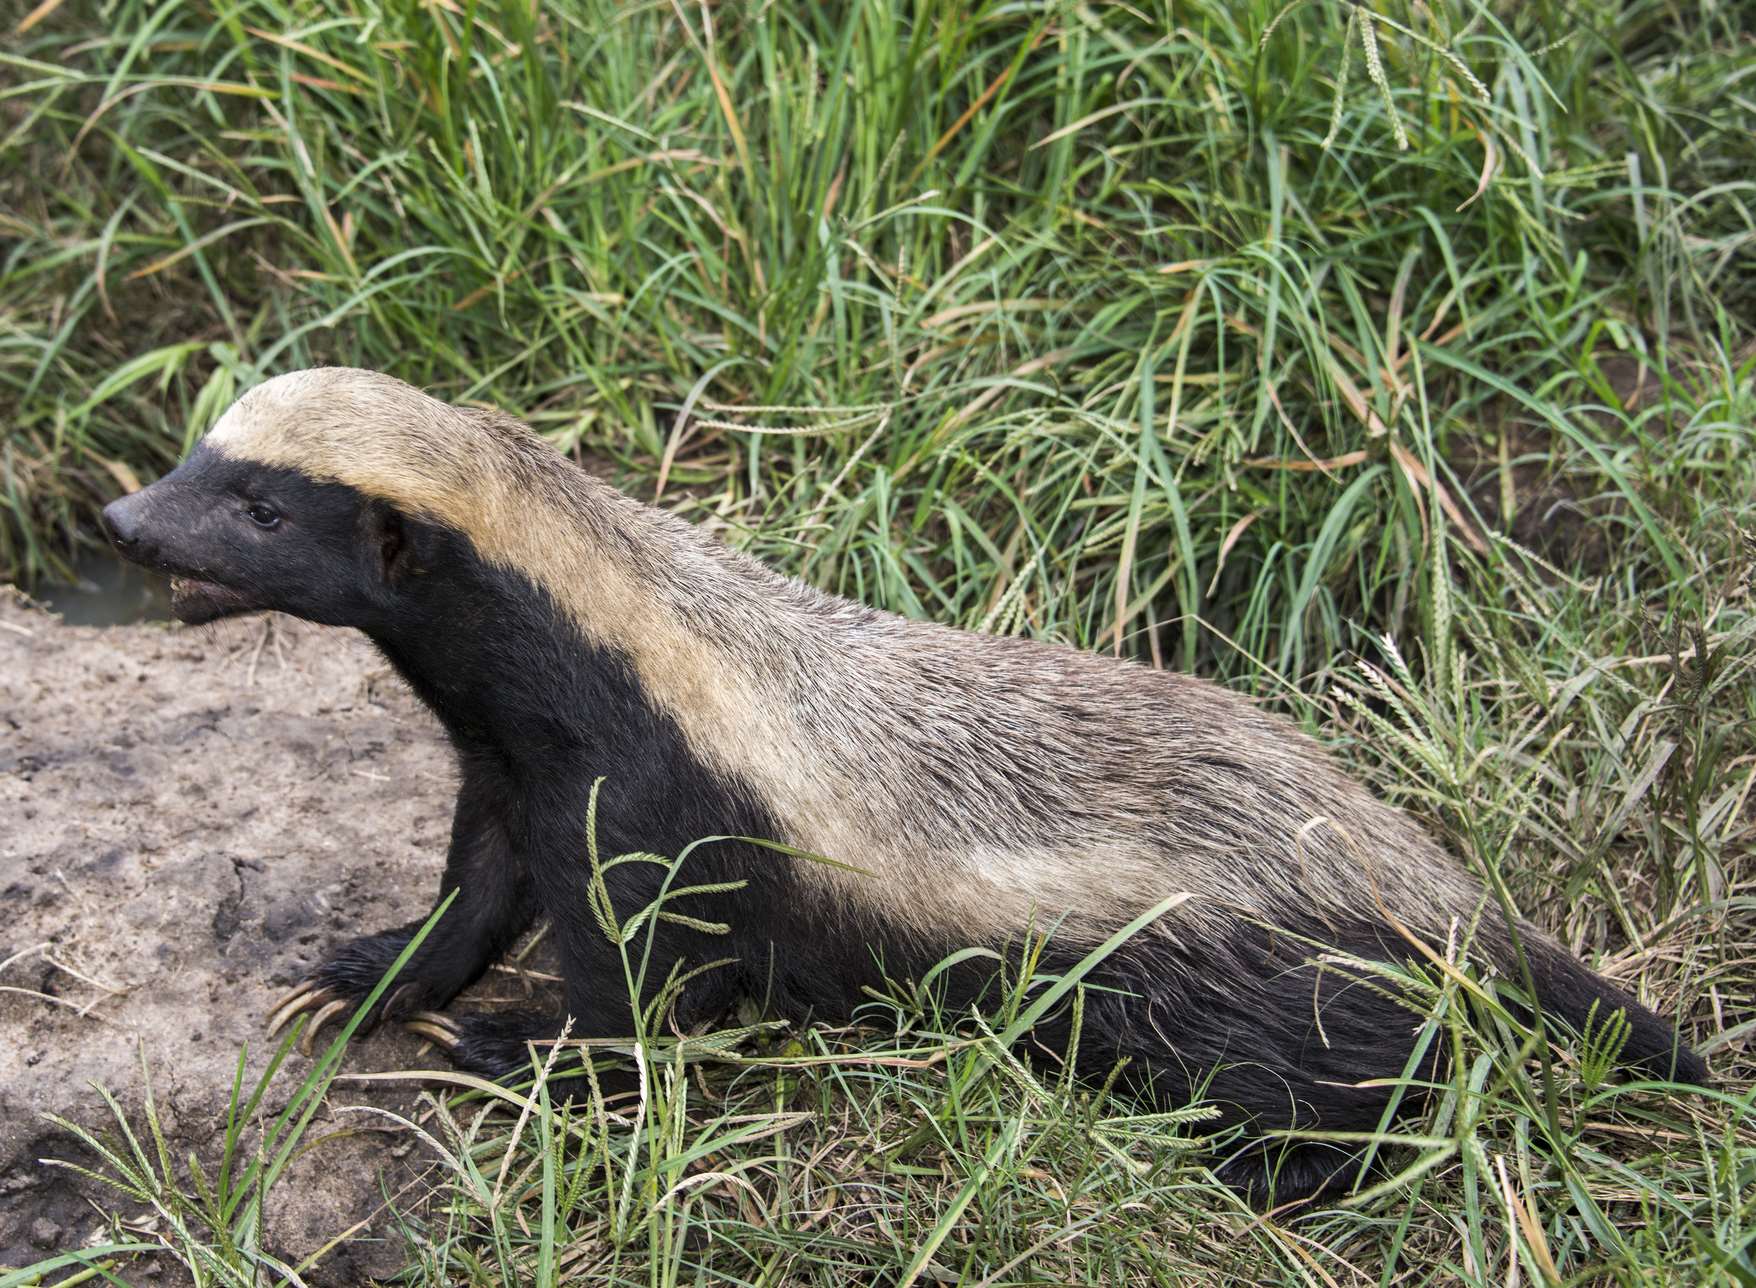 The carnivore keeper would work with honey badgers. Stock image